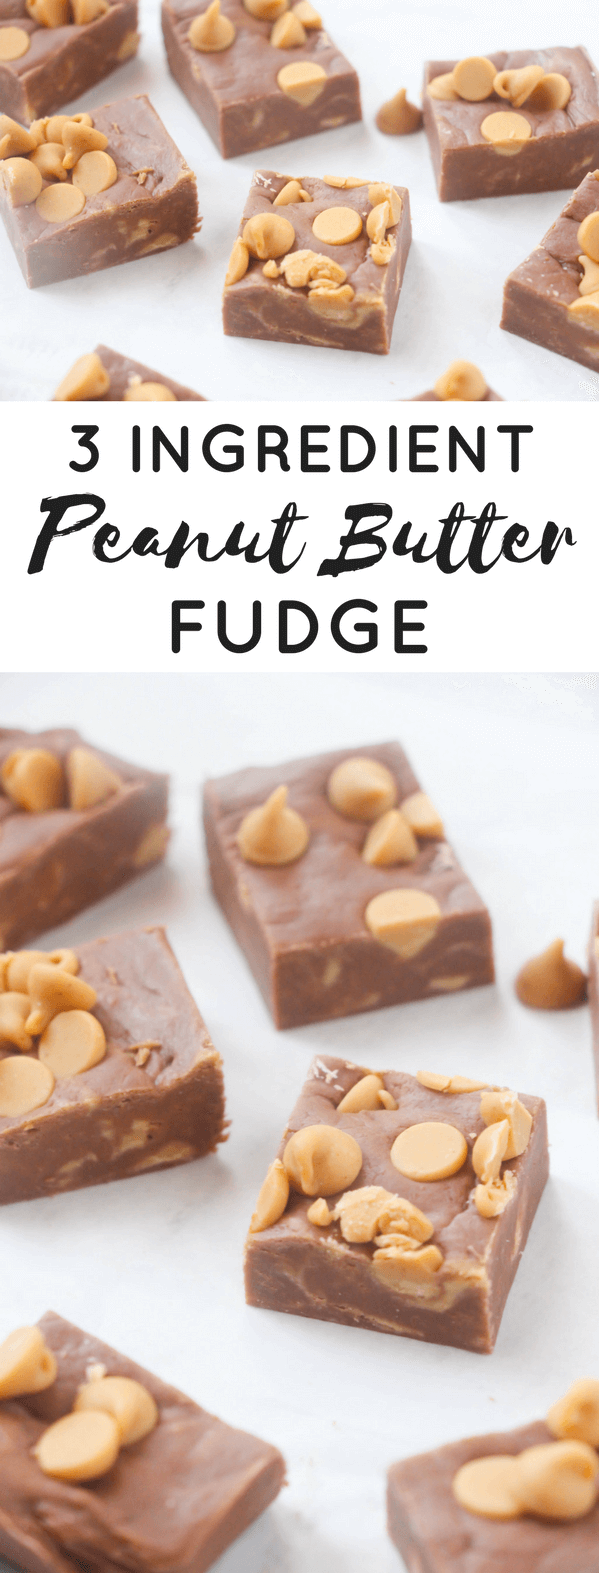 This quick and easy 3 ingredient peanut butter fudge recipe takes minutes to throw together. The hardest part is waiting 4 hours for it to set!